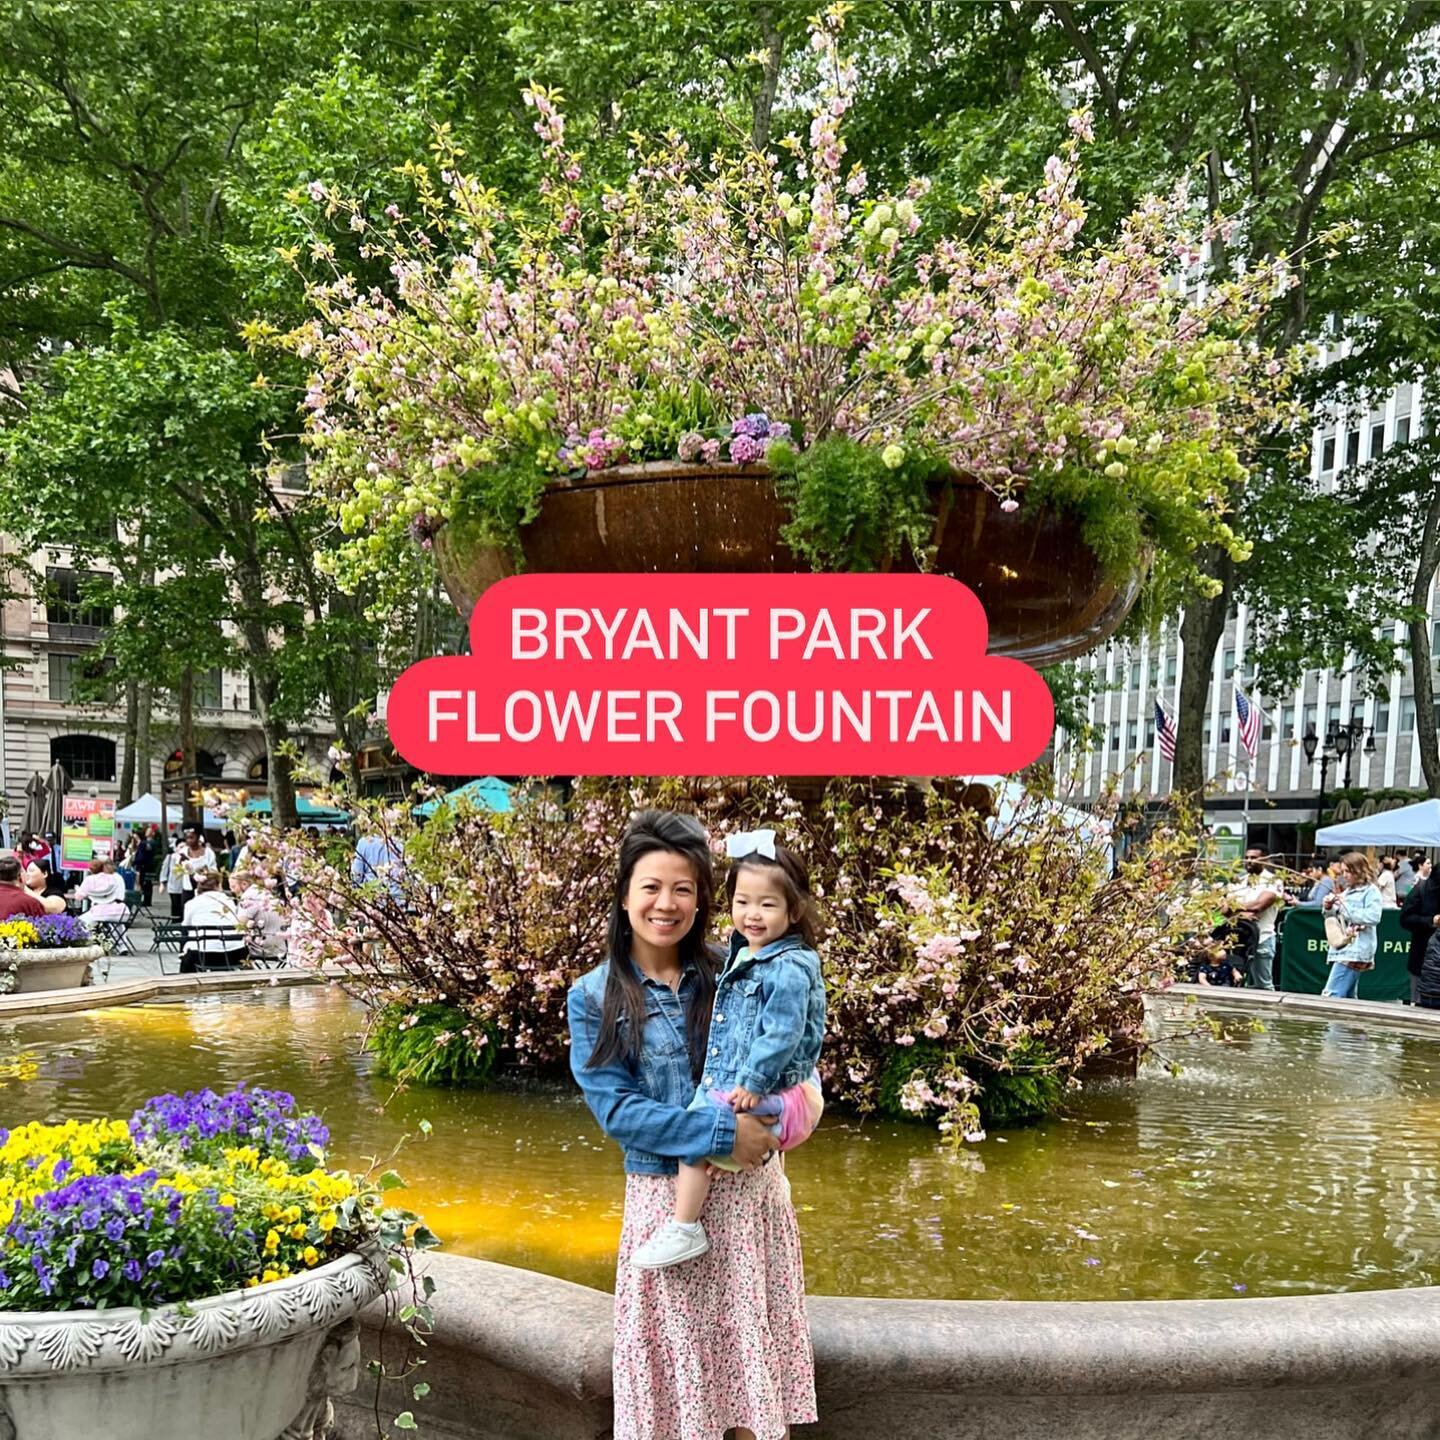 🌸 NYC MUST SEE ASAP 🌸 this famous fountain was decorated with flowers! It was so beautiful in person and a great weekend activity as there is:
🌸 a carousel
🌸116 vendor pop-up stalls! The market is open 11am- 7pm on:
May 19th &ndash; May 21st, 202